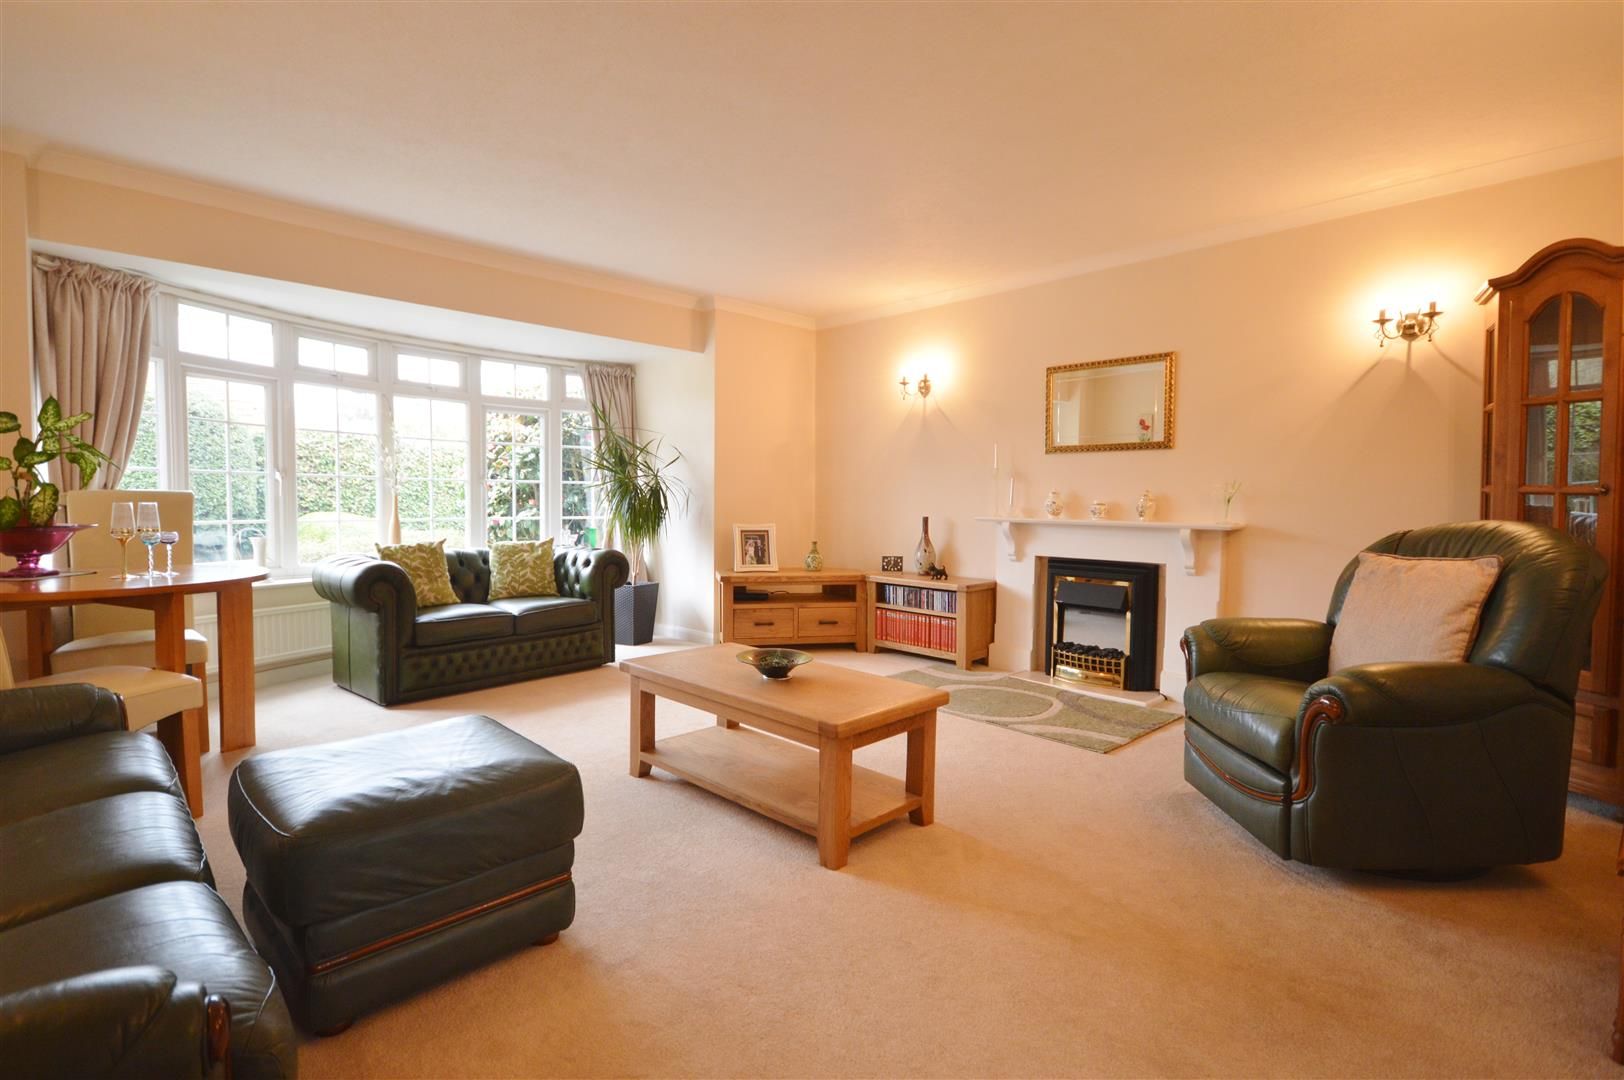 2 bed semi-detached bungalow for sale in Leominster  - Property Image 2